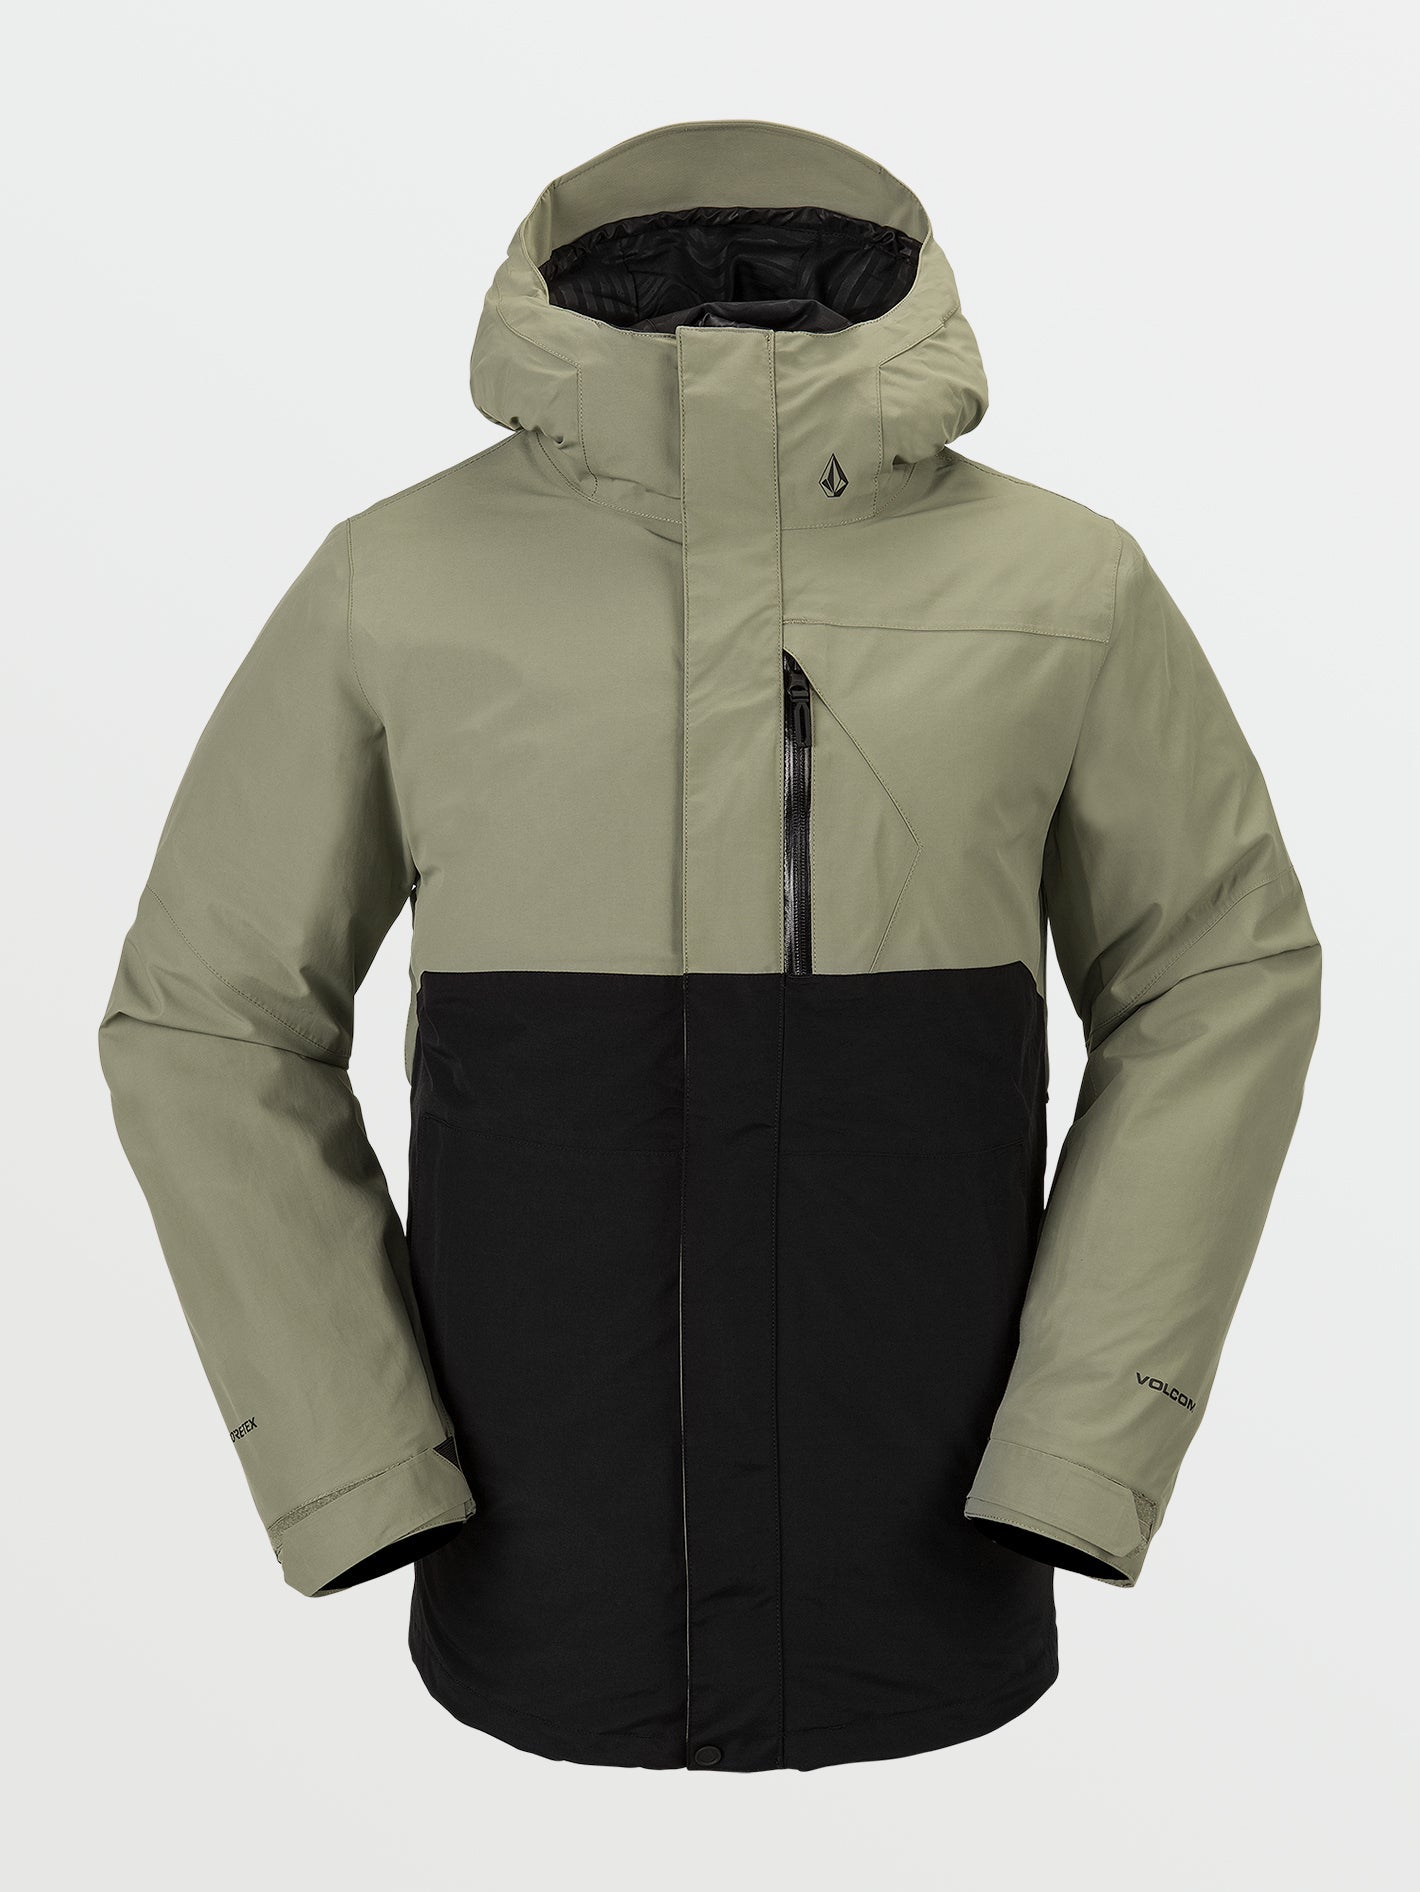 Mens L Insulated Gore-Tex Jacket - Light Military – Volcom Japan